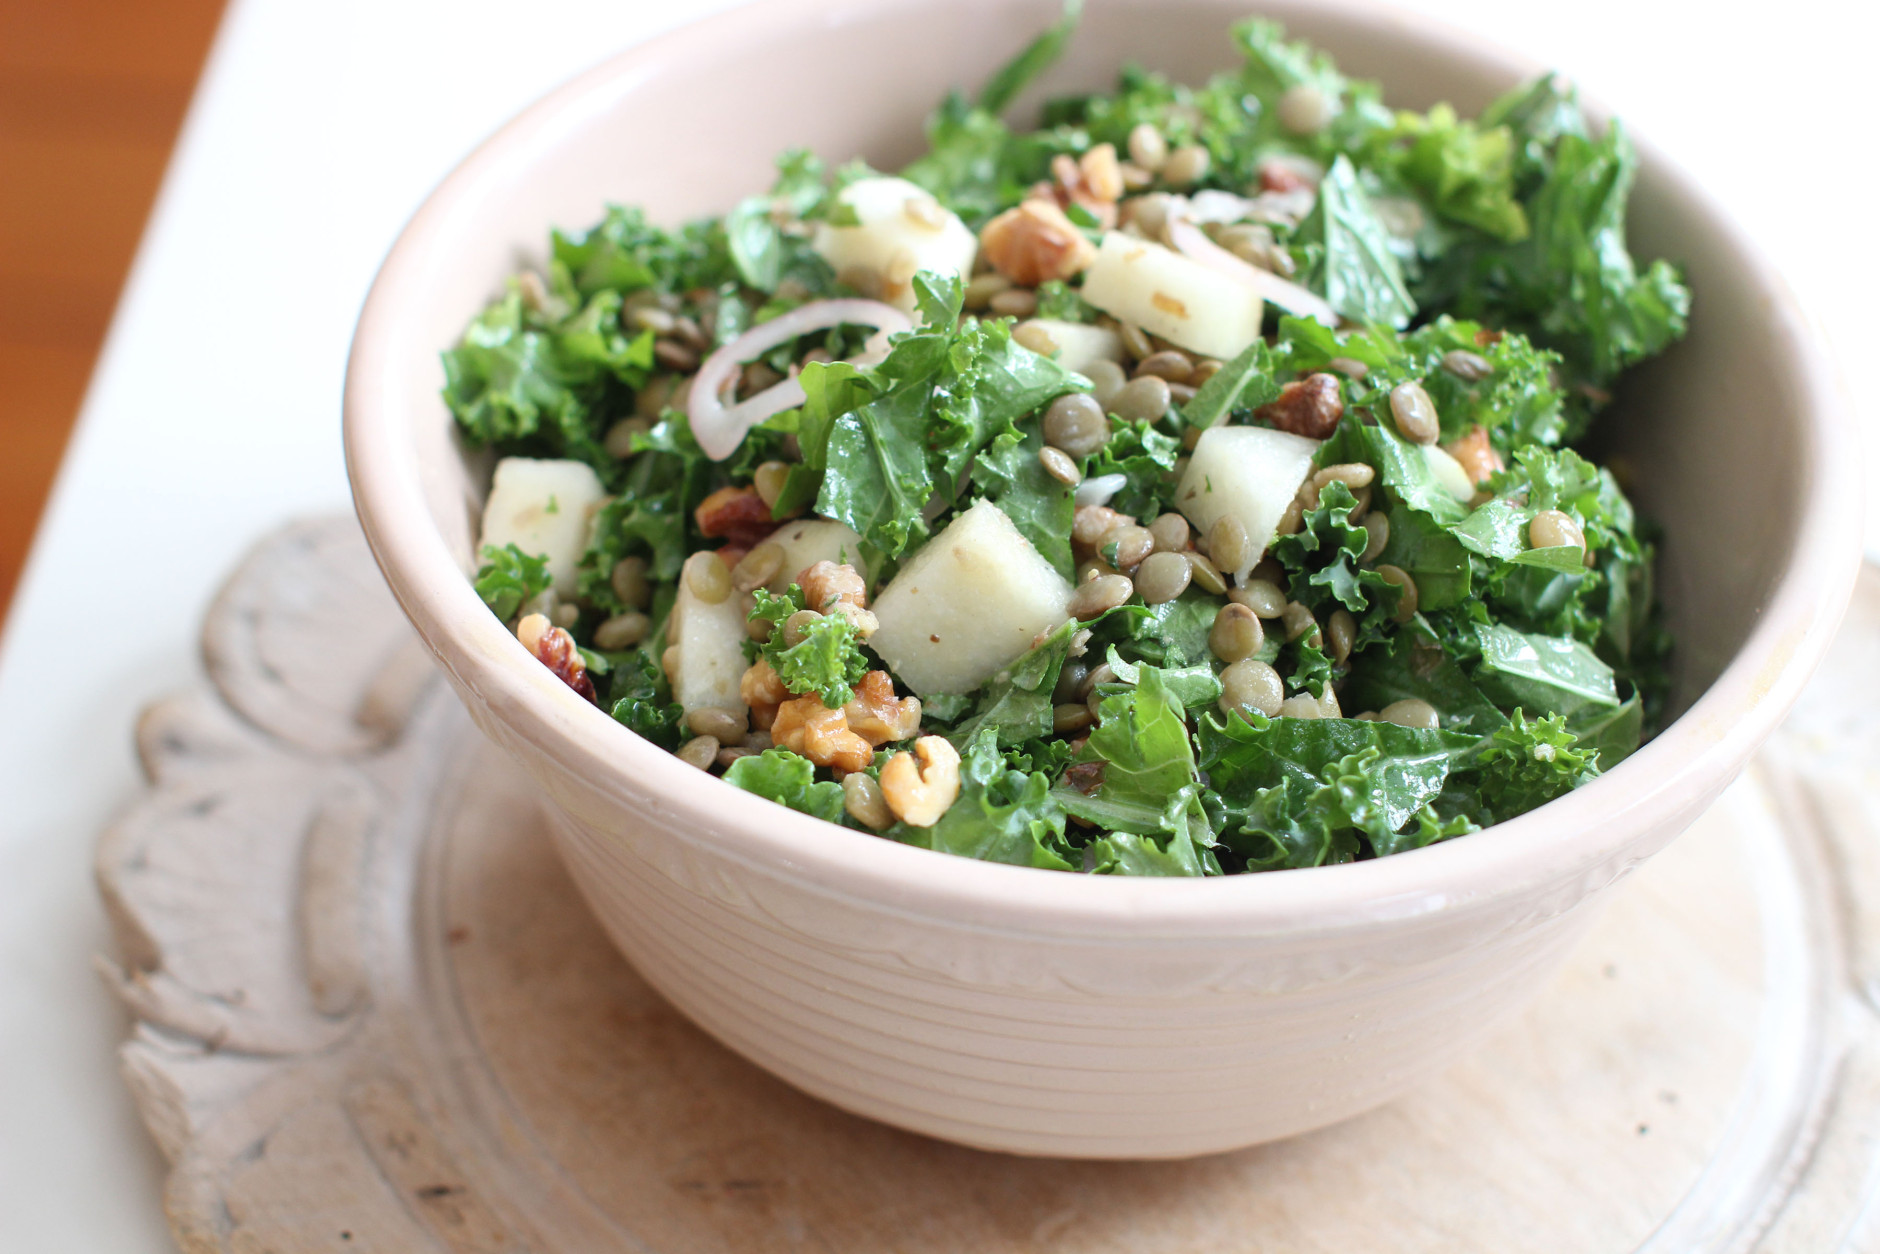 This Feb. 2, 2015, photo shows chopped kale and lentil winter salad in Concord, N.H. This winter salads manages to feel both energizing and comforting at the same time. (AP Photo/Matthew Mead)